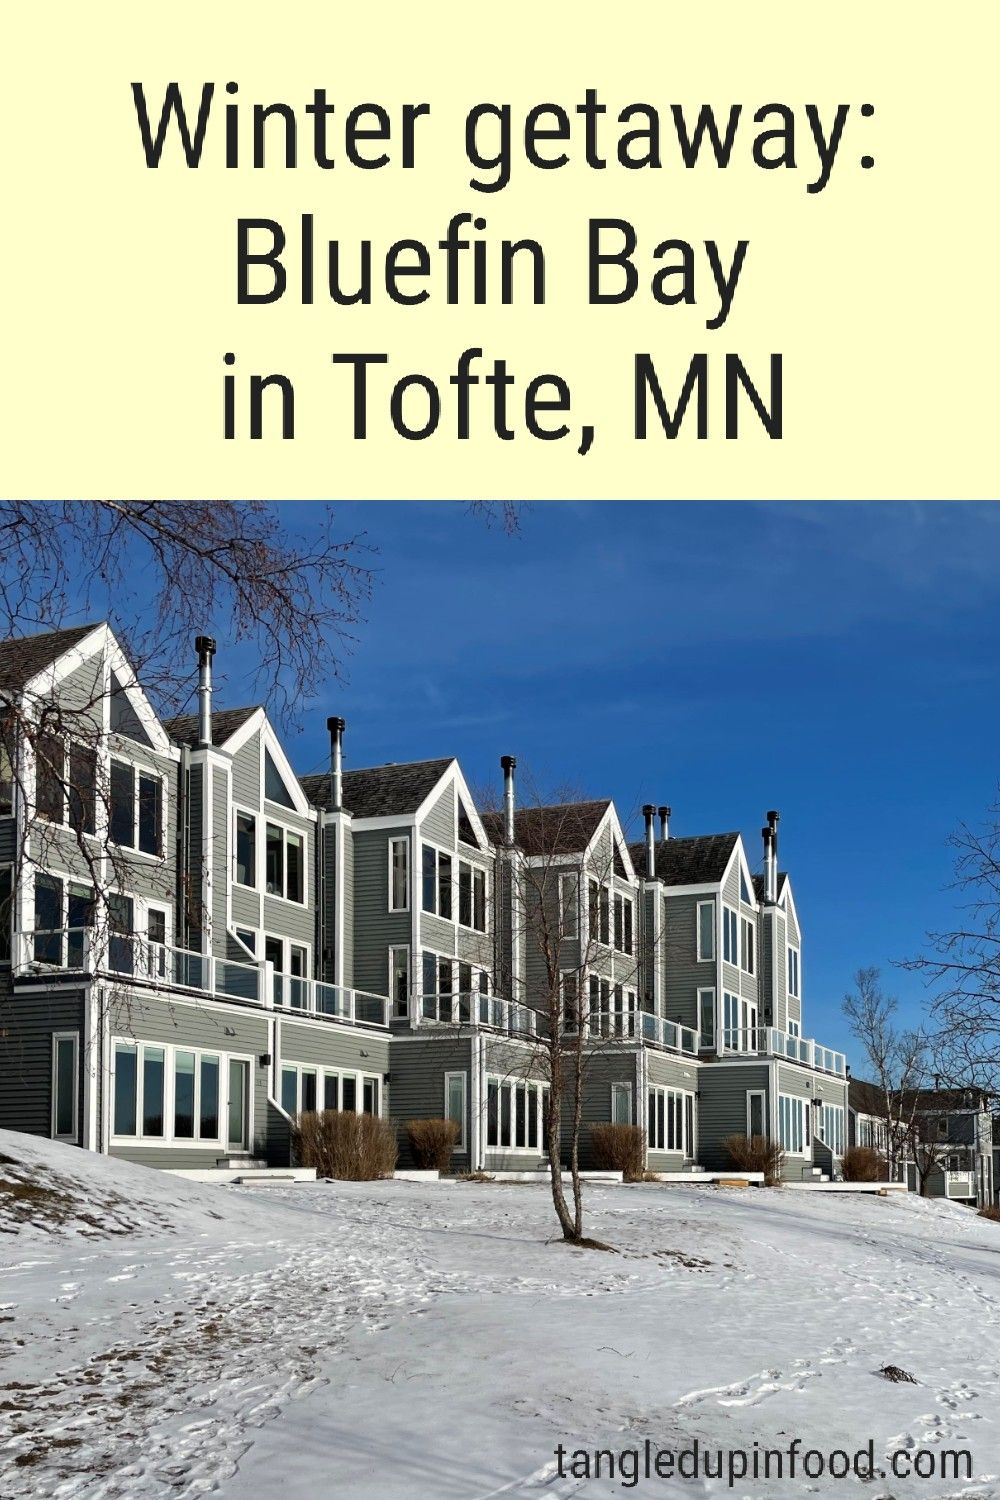 Row of lakeside townhomes with text reading "Winter getaway: Bluefin Bay in Tofte, MN"